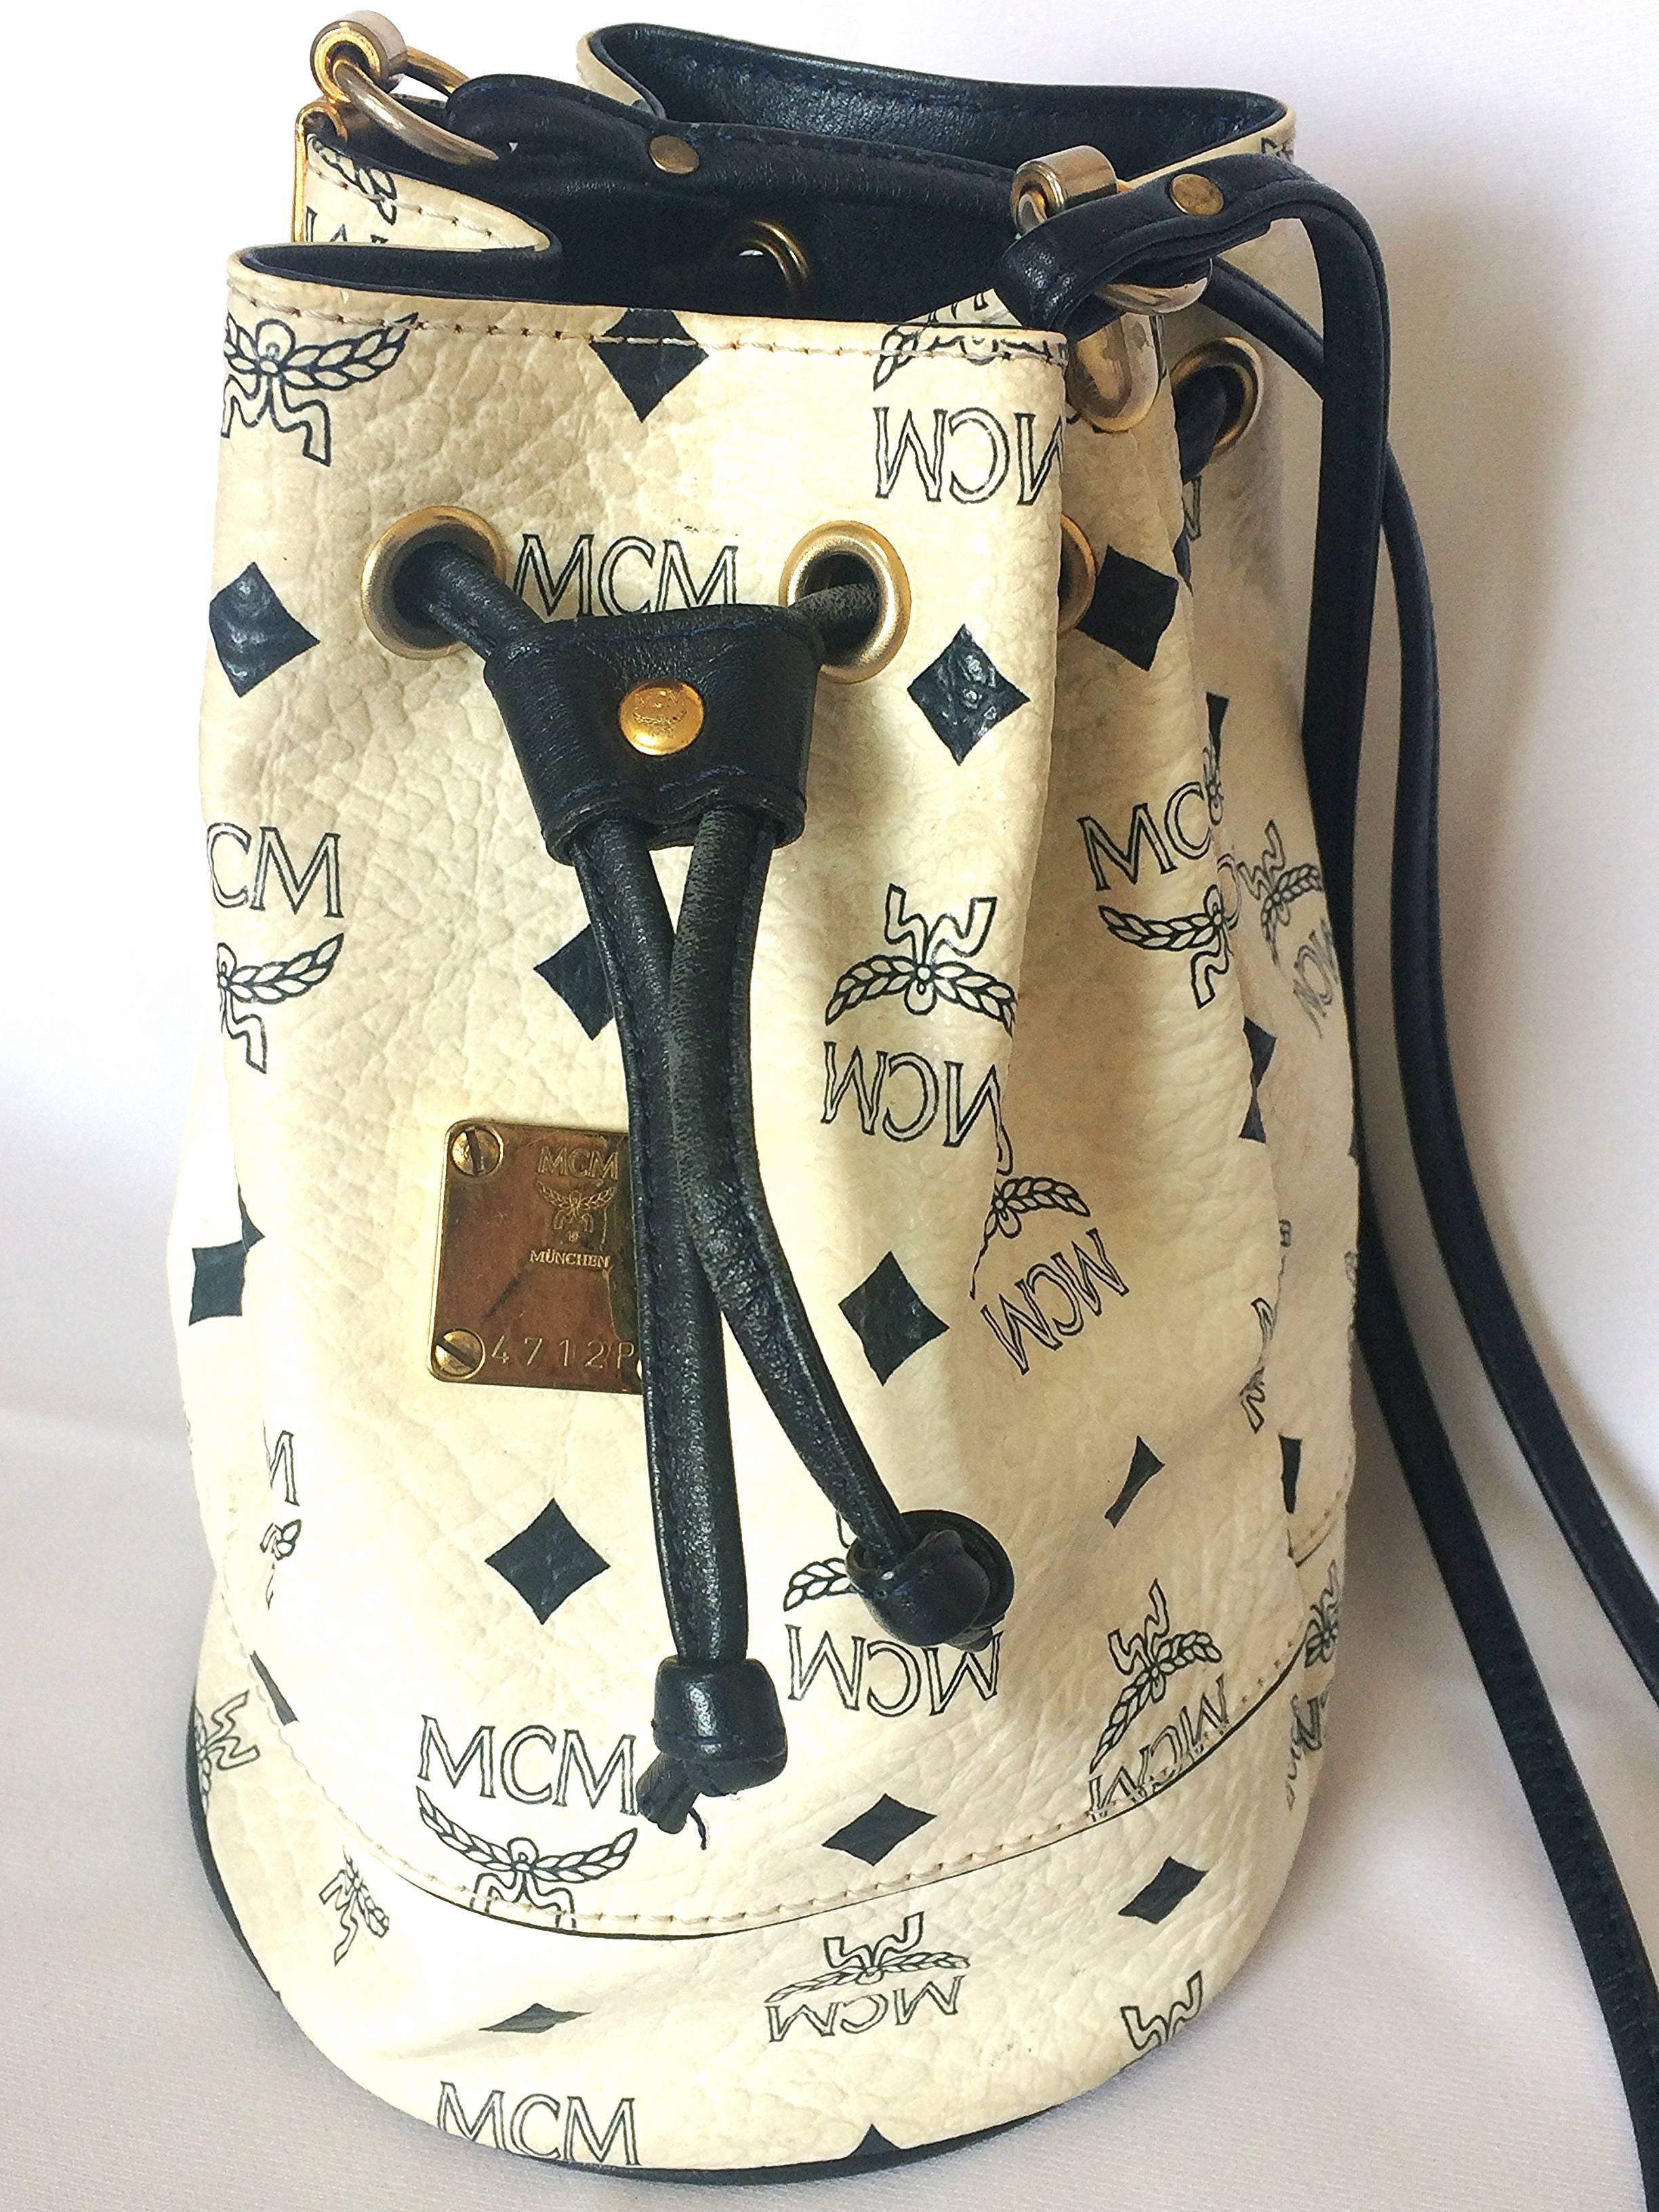 1990s. Vintage MCM white/ivory and navy monogram small hobo bucket bag. So chic and cute. Great vintage gift.

MCM has been back in the fashion trend again!!
Now it's considered to be one of the must-have designer in fashion.

Introducing a